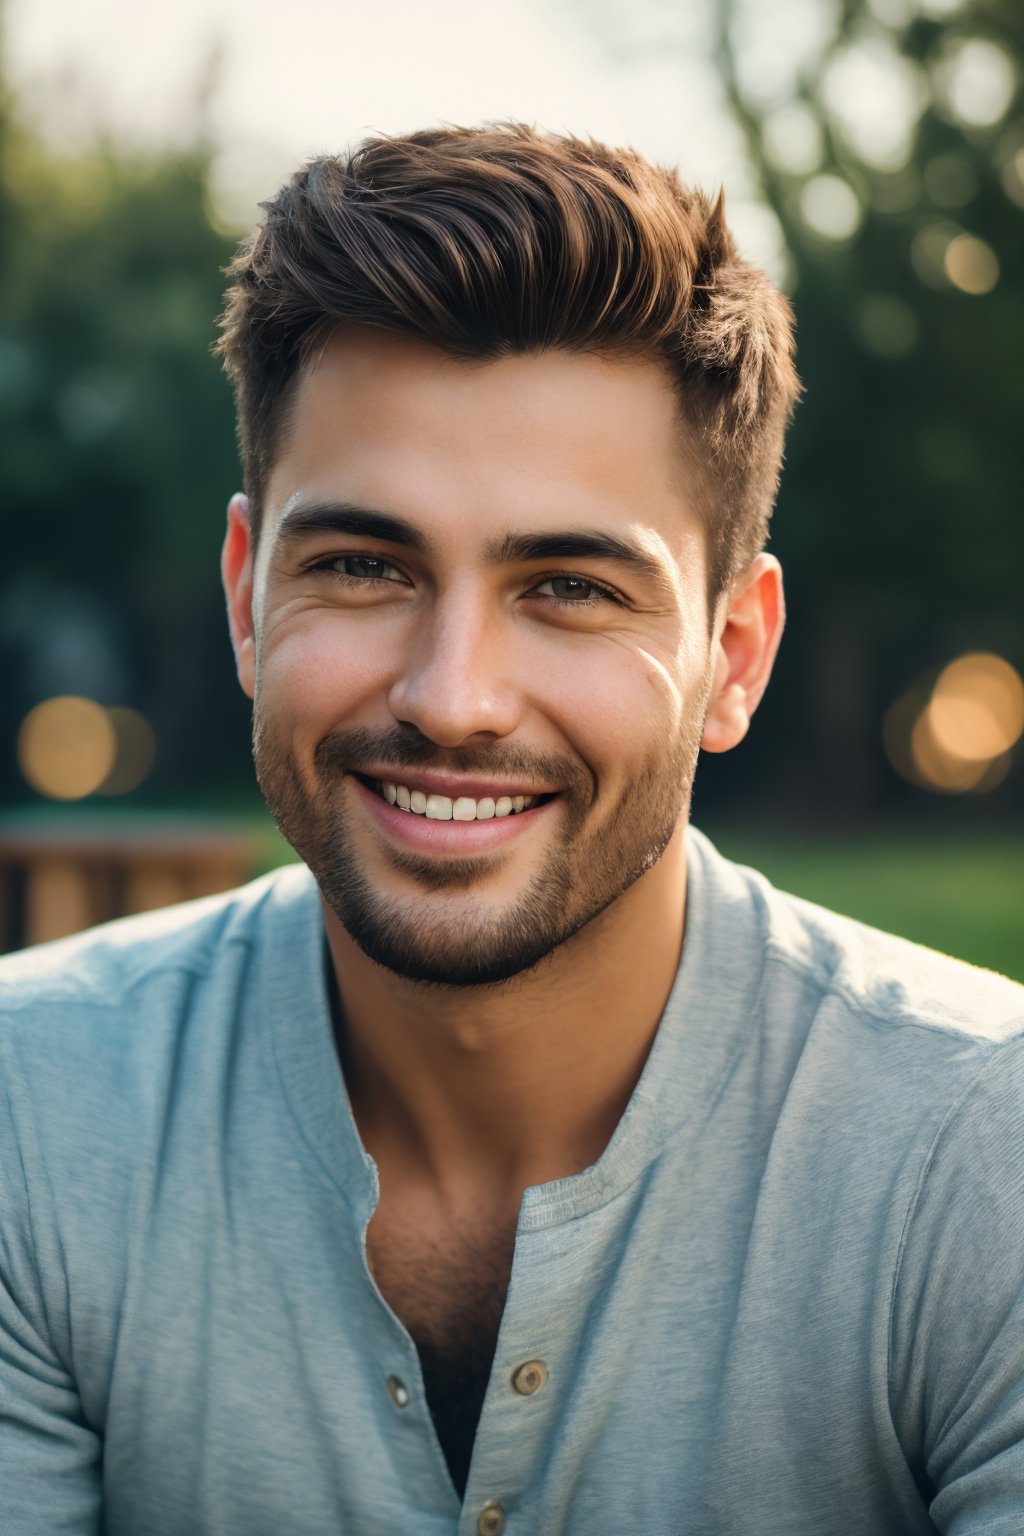 (best quality,8K,highres,masterpiece), ultra-detailed, (photo-realistic, lifelike) close-up portrait of a man with a warm and genuine smile. The outdoor setting adds natural beauty, and the cinematic lighting enhances the photo's (captivating, cinematic) quality, making it a true masterpiece.